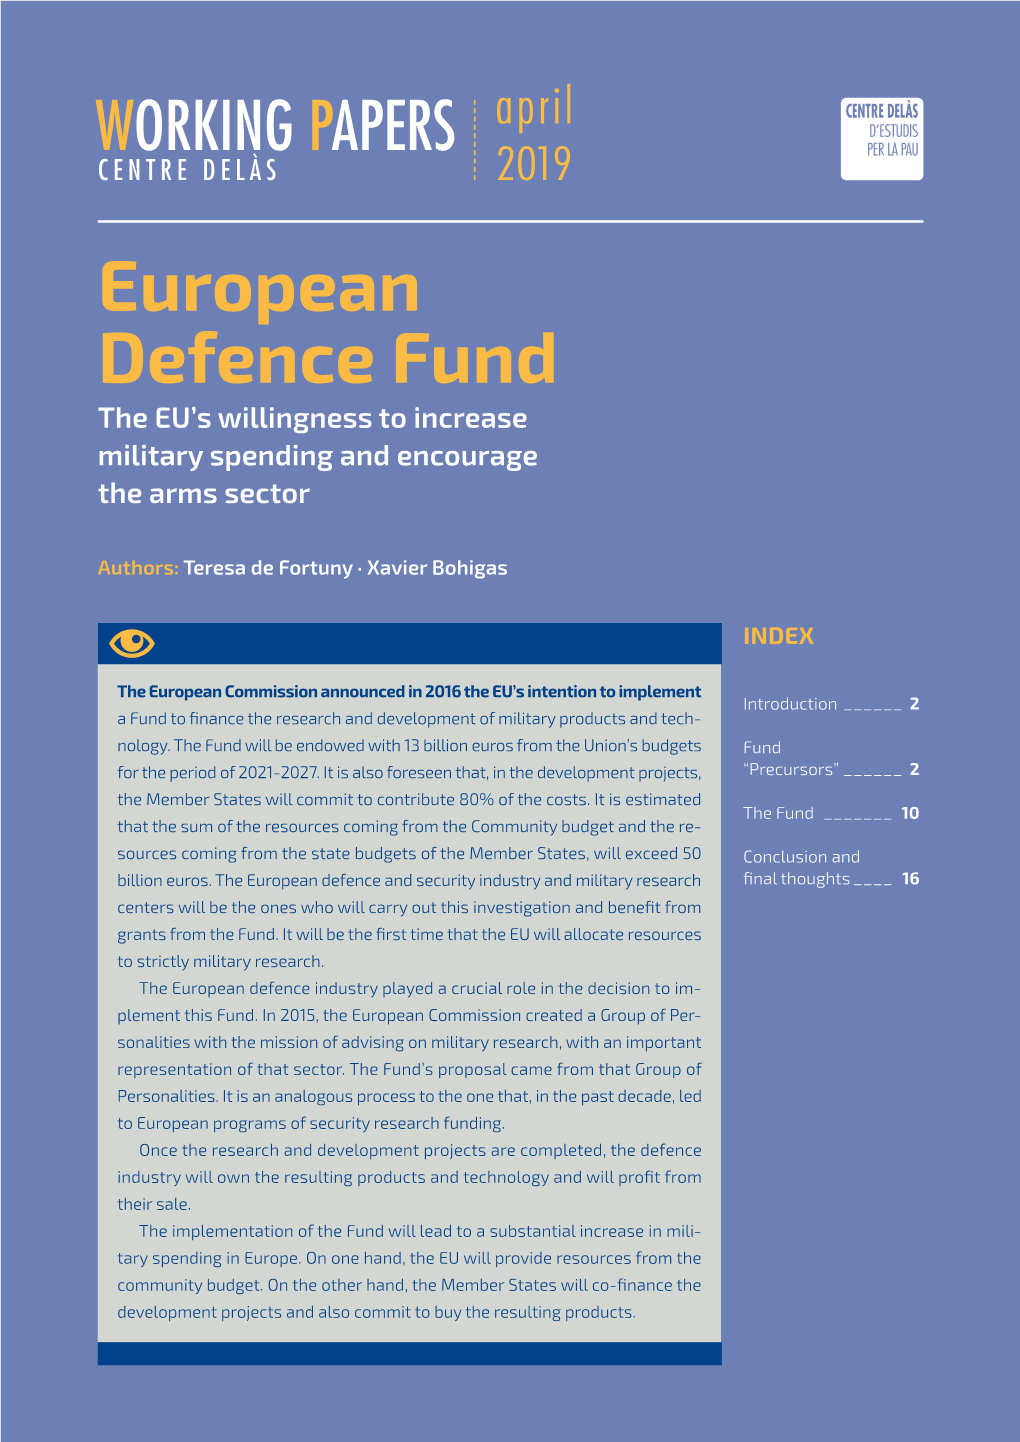 European Defence Fund the EU’S Willingness to Increase Military Spending and Encourage the Arms Sector